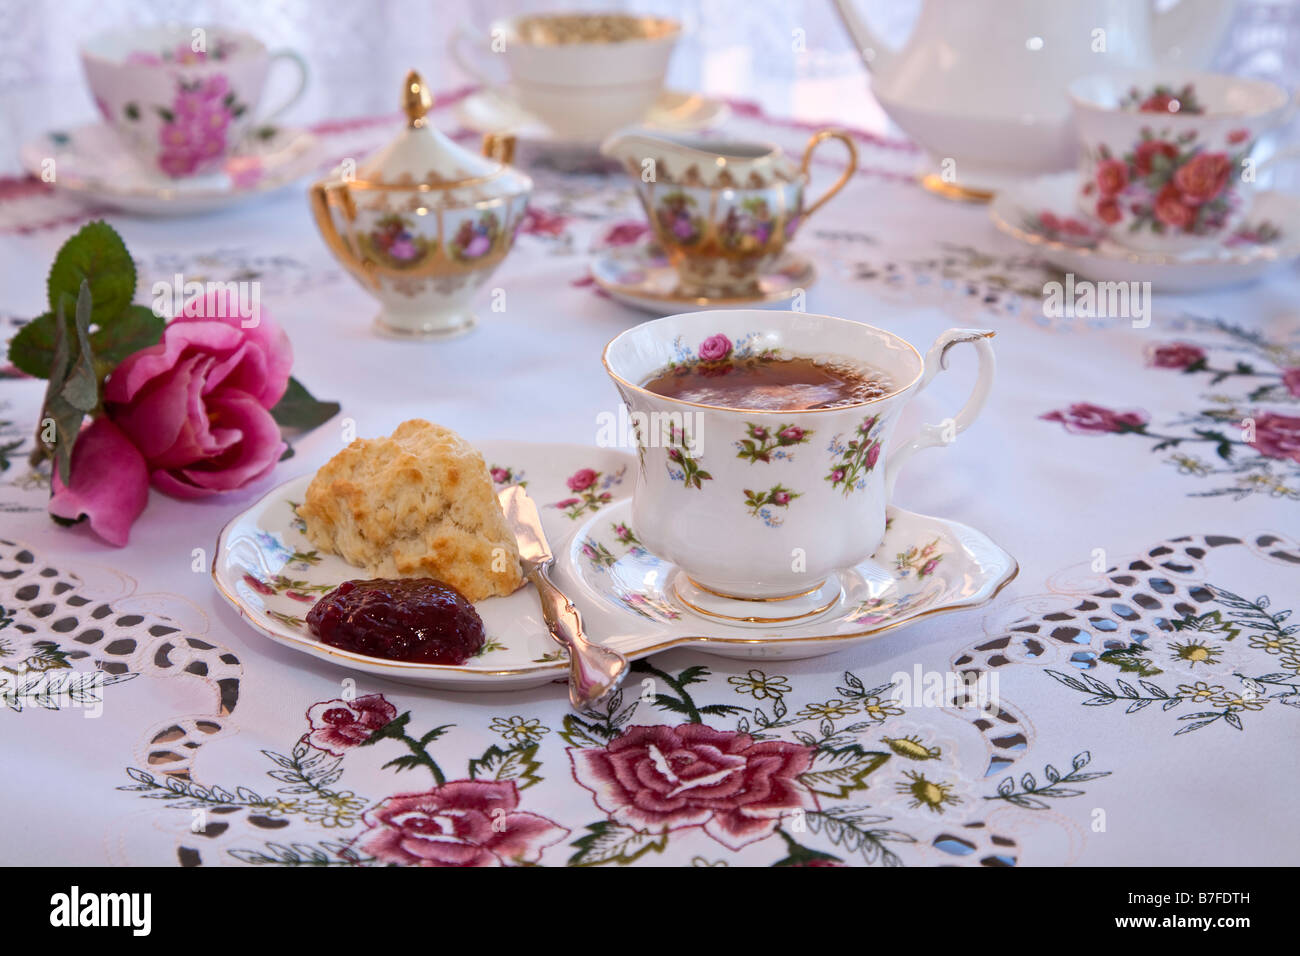 How To Set A Table For Afternoon Tea : Table Setting For High Tea Picture Of Moments Memories Tea Room Beechworth Tripadvisor / The reason being is afternoon tea…tips,terms and traditions 72 pages of how to's, 27 photos, history, etiquette and faq about afternoon tea, serving styles and more.